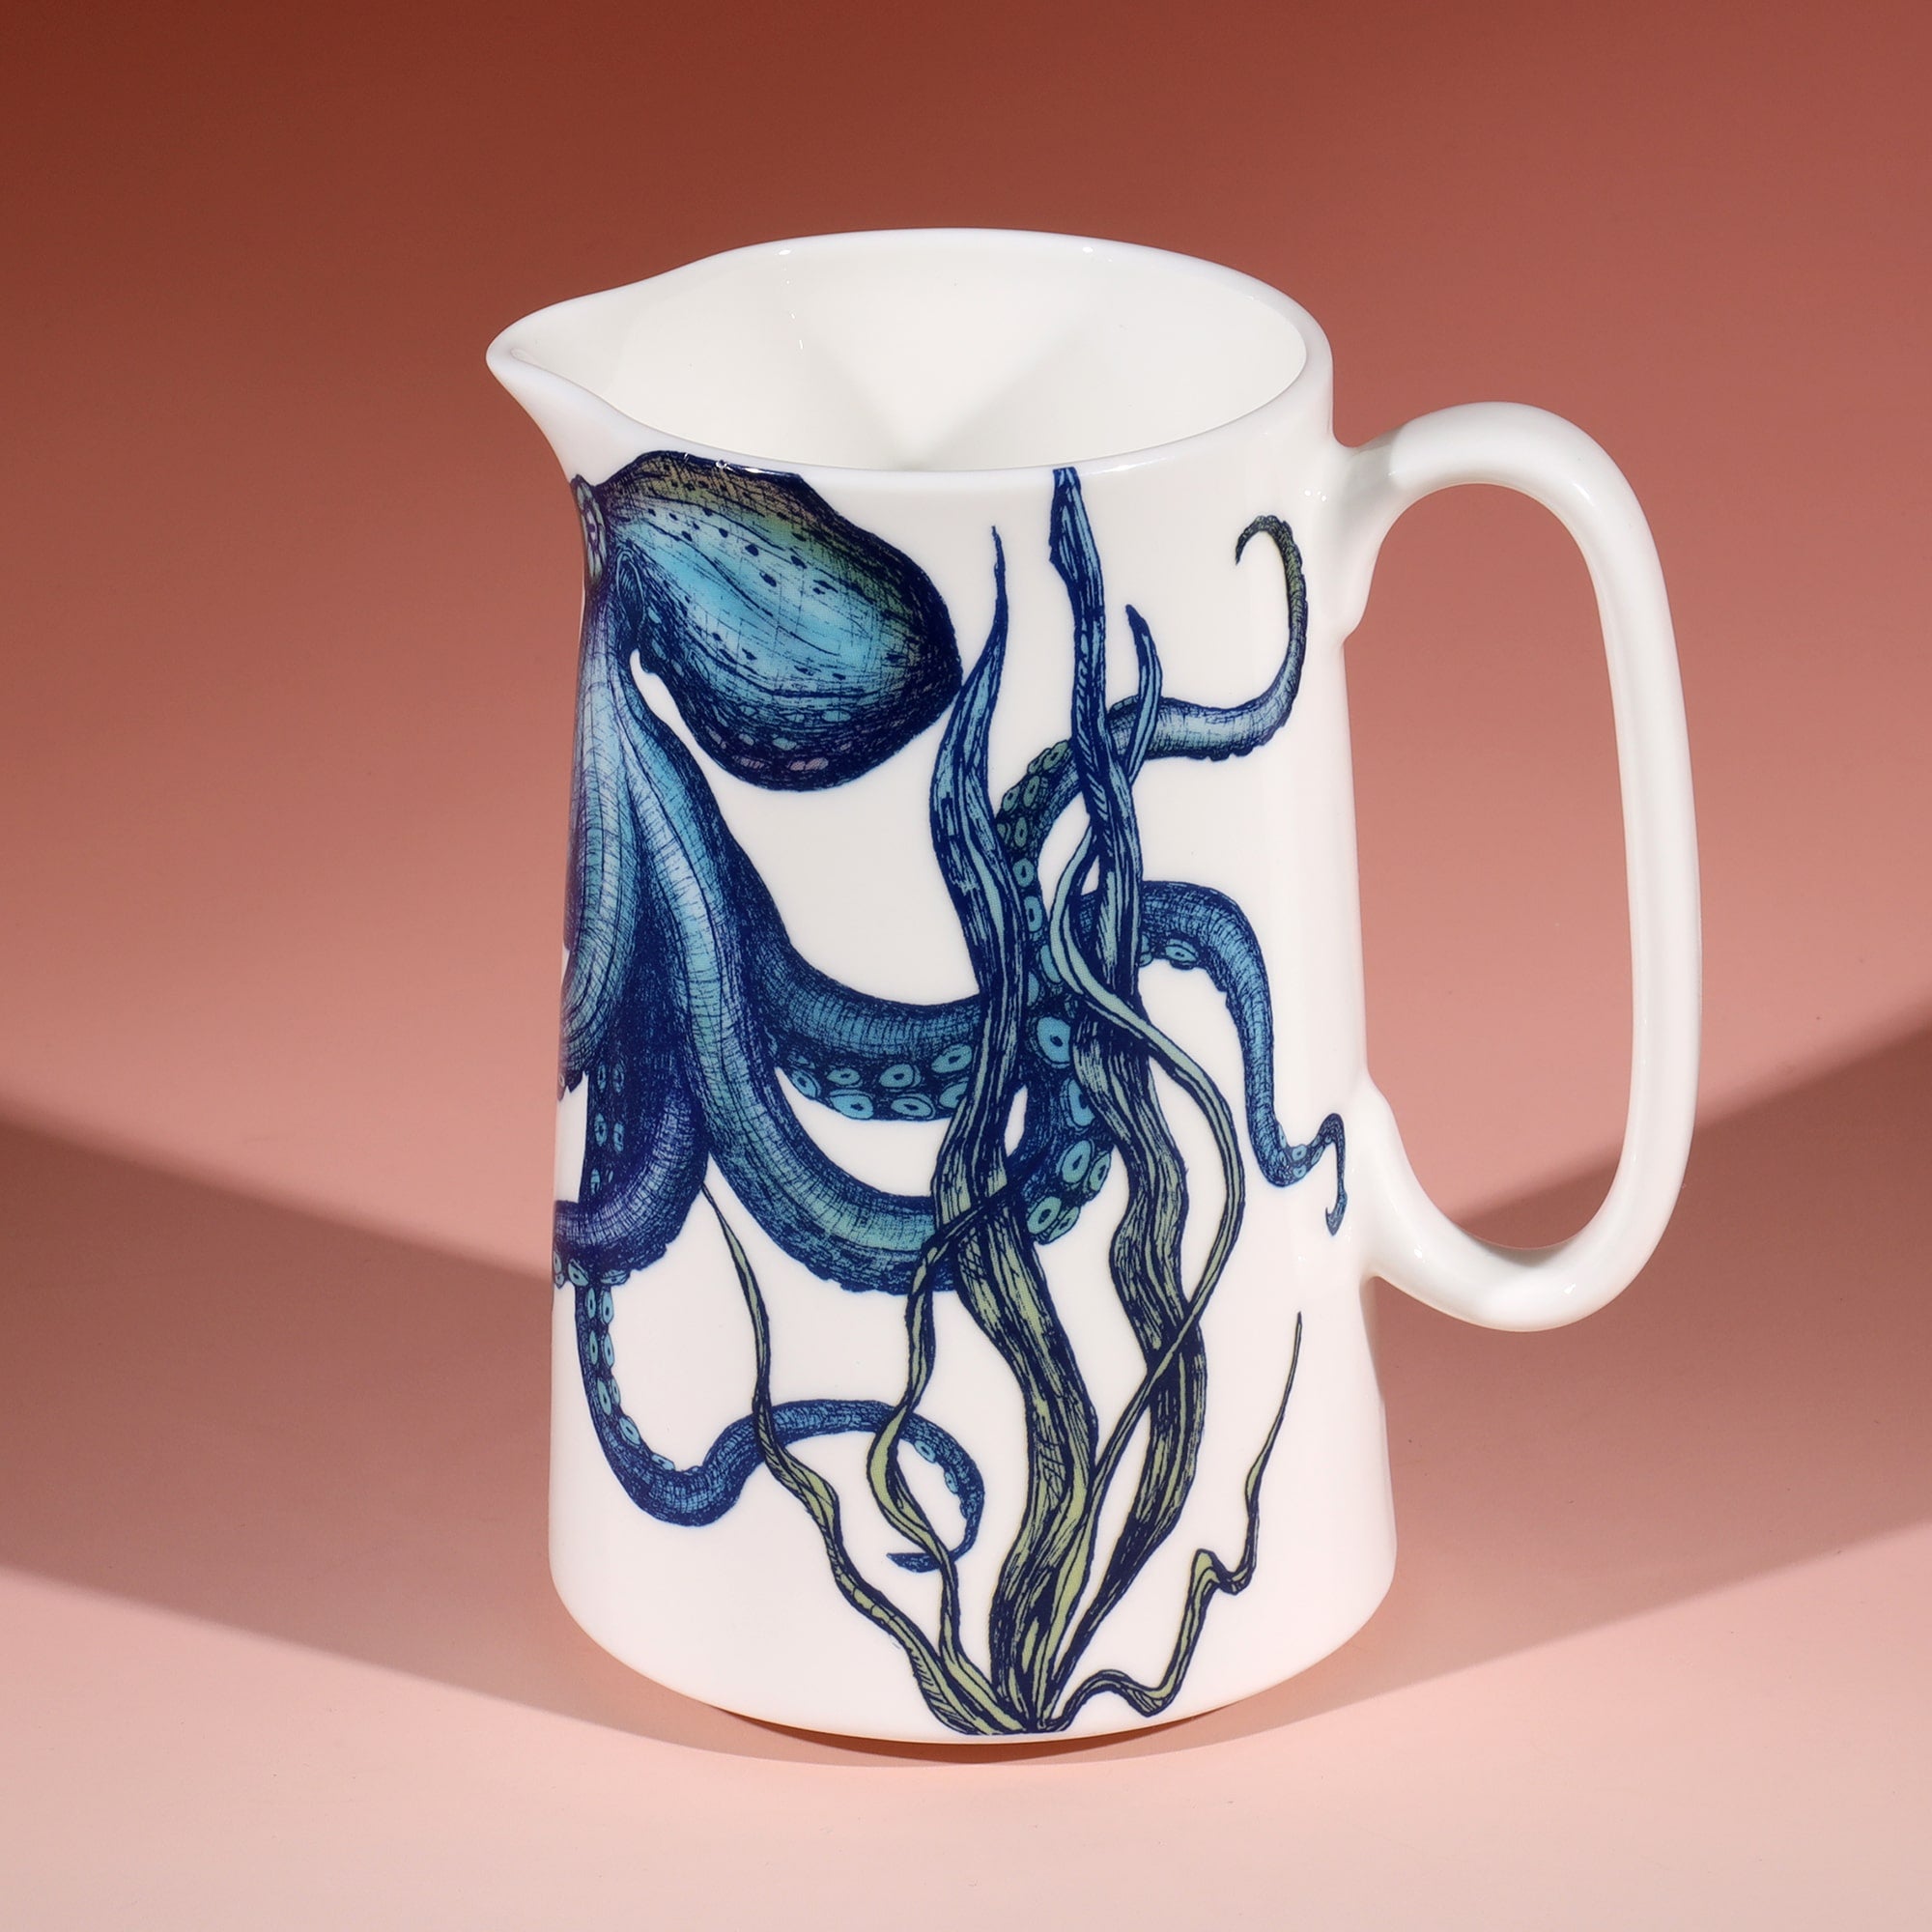 White jug with a brightly coloured blue and green octopus and seaweed design on a graduated coral coloured background. 